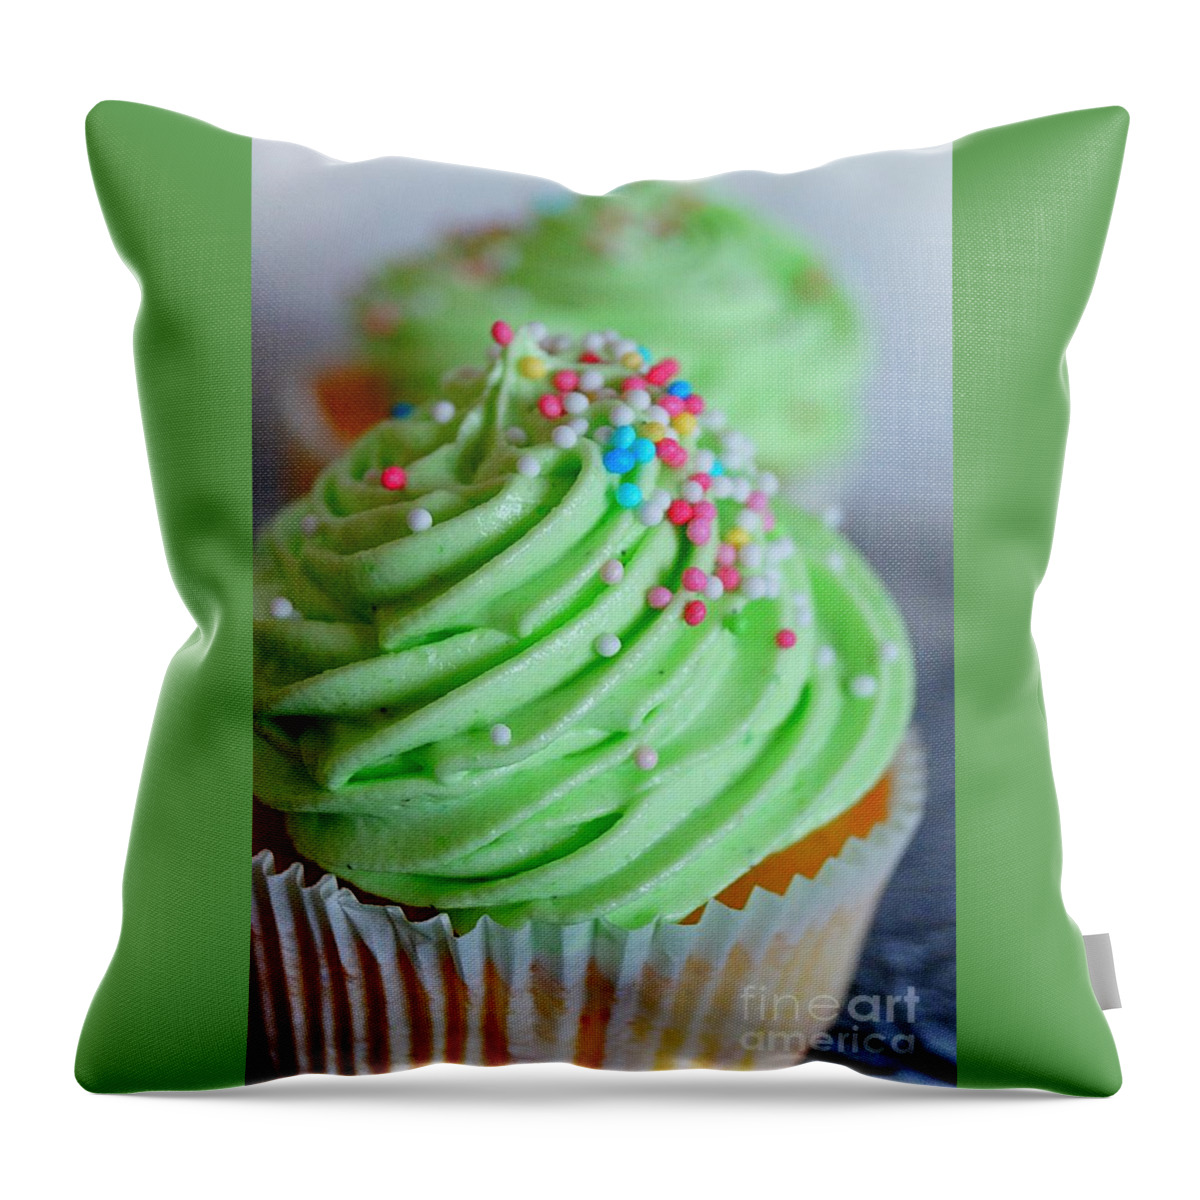 Cupcake Throw Pillow featuring the photograph The Green Cupcake by Claudia Zahnd-Prezioso